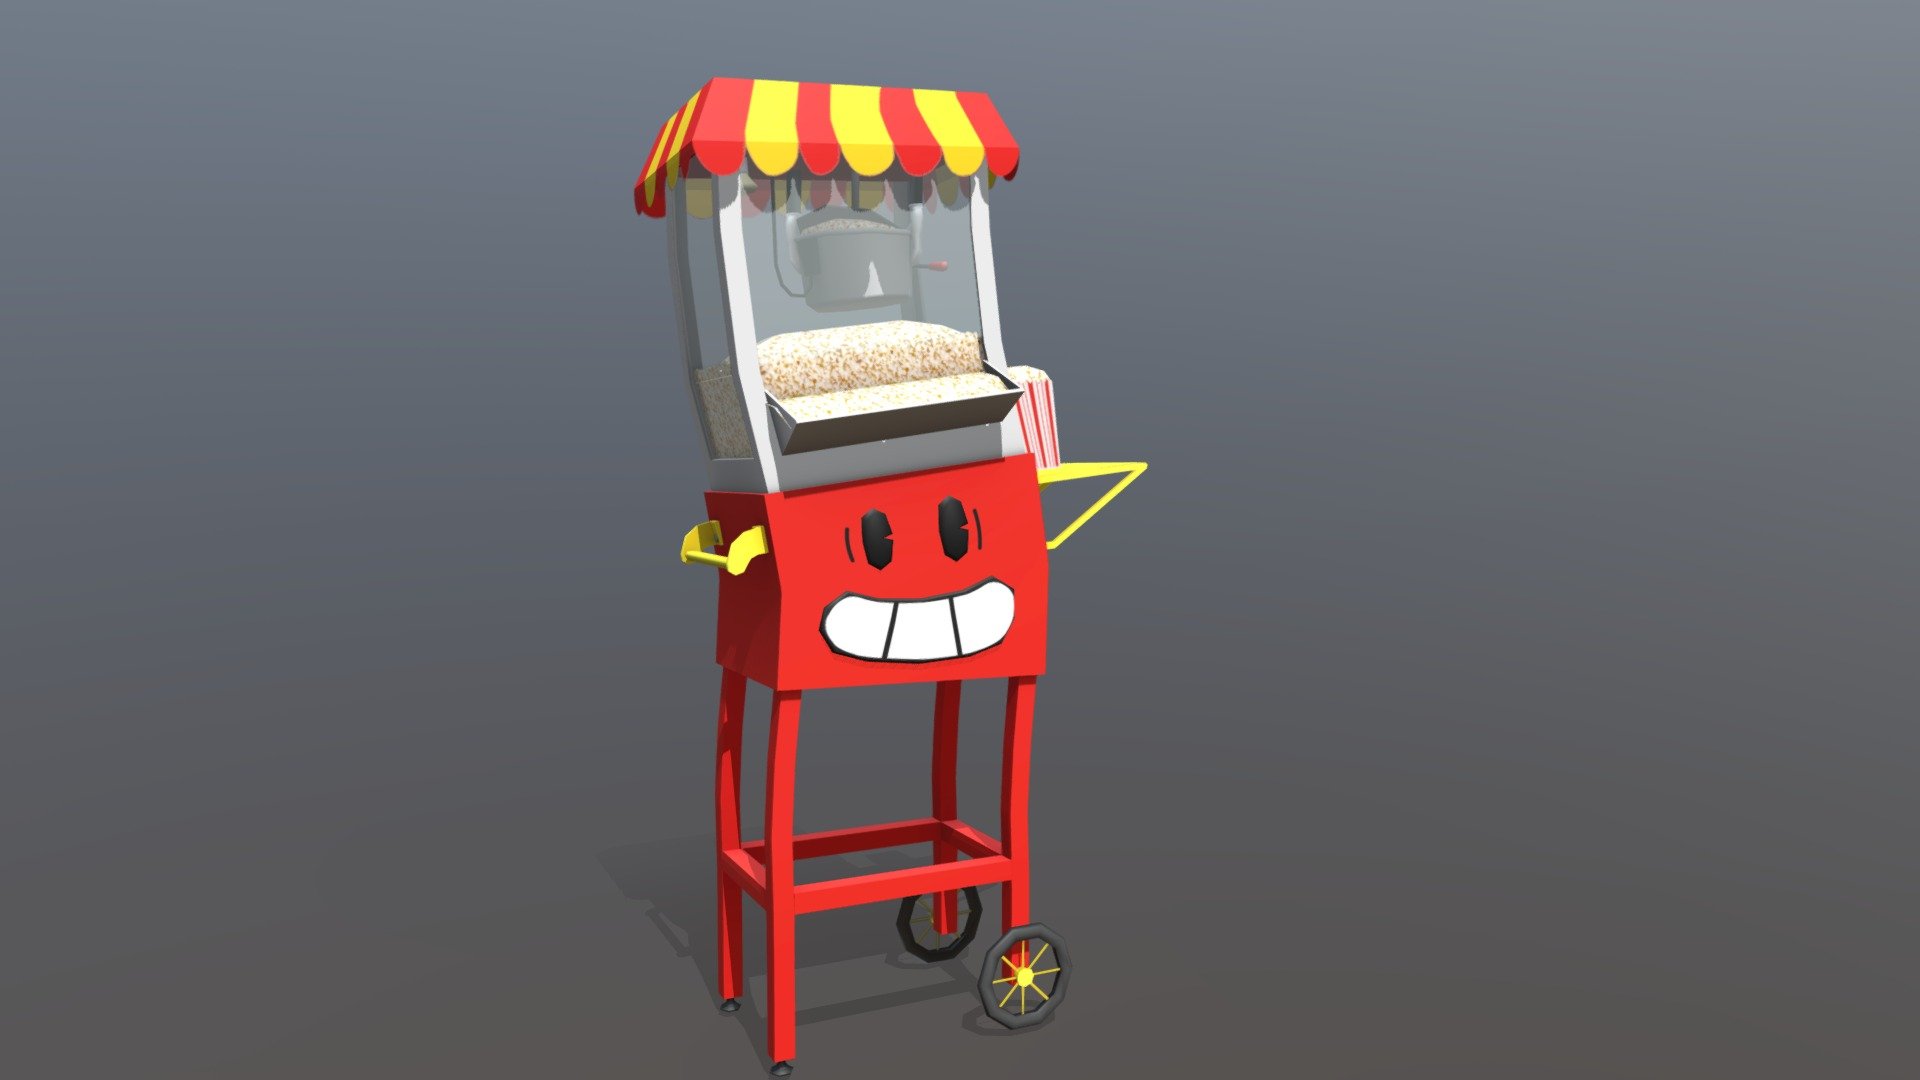 For the Toon Diner Rax and I are making

I spent much more time trying to animate it than making the model itself

Smooth shading the the popcorn container messed up the shading so I left it as is

For some reason the bind pose is gone - Toon Popcorn Cart - 3D model by GREENCAT (@GREENCAT1337) 3d model